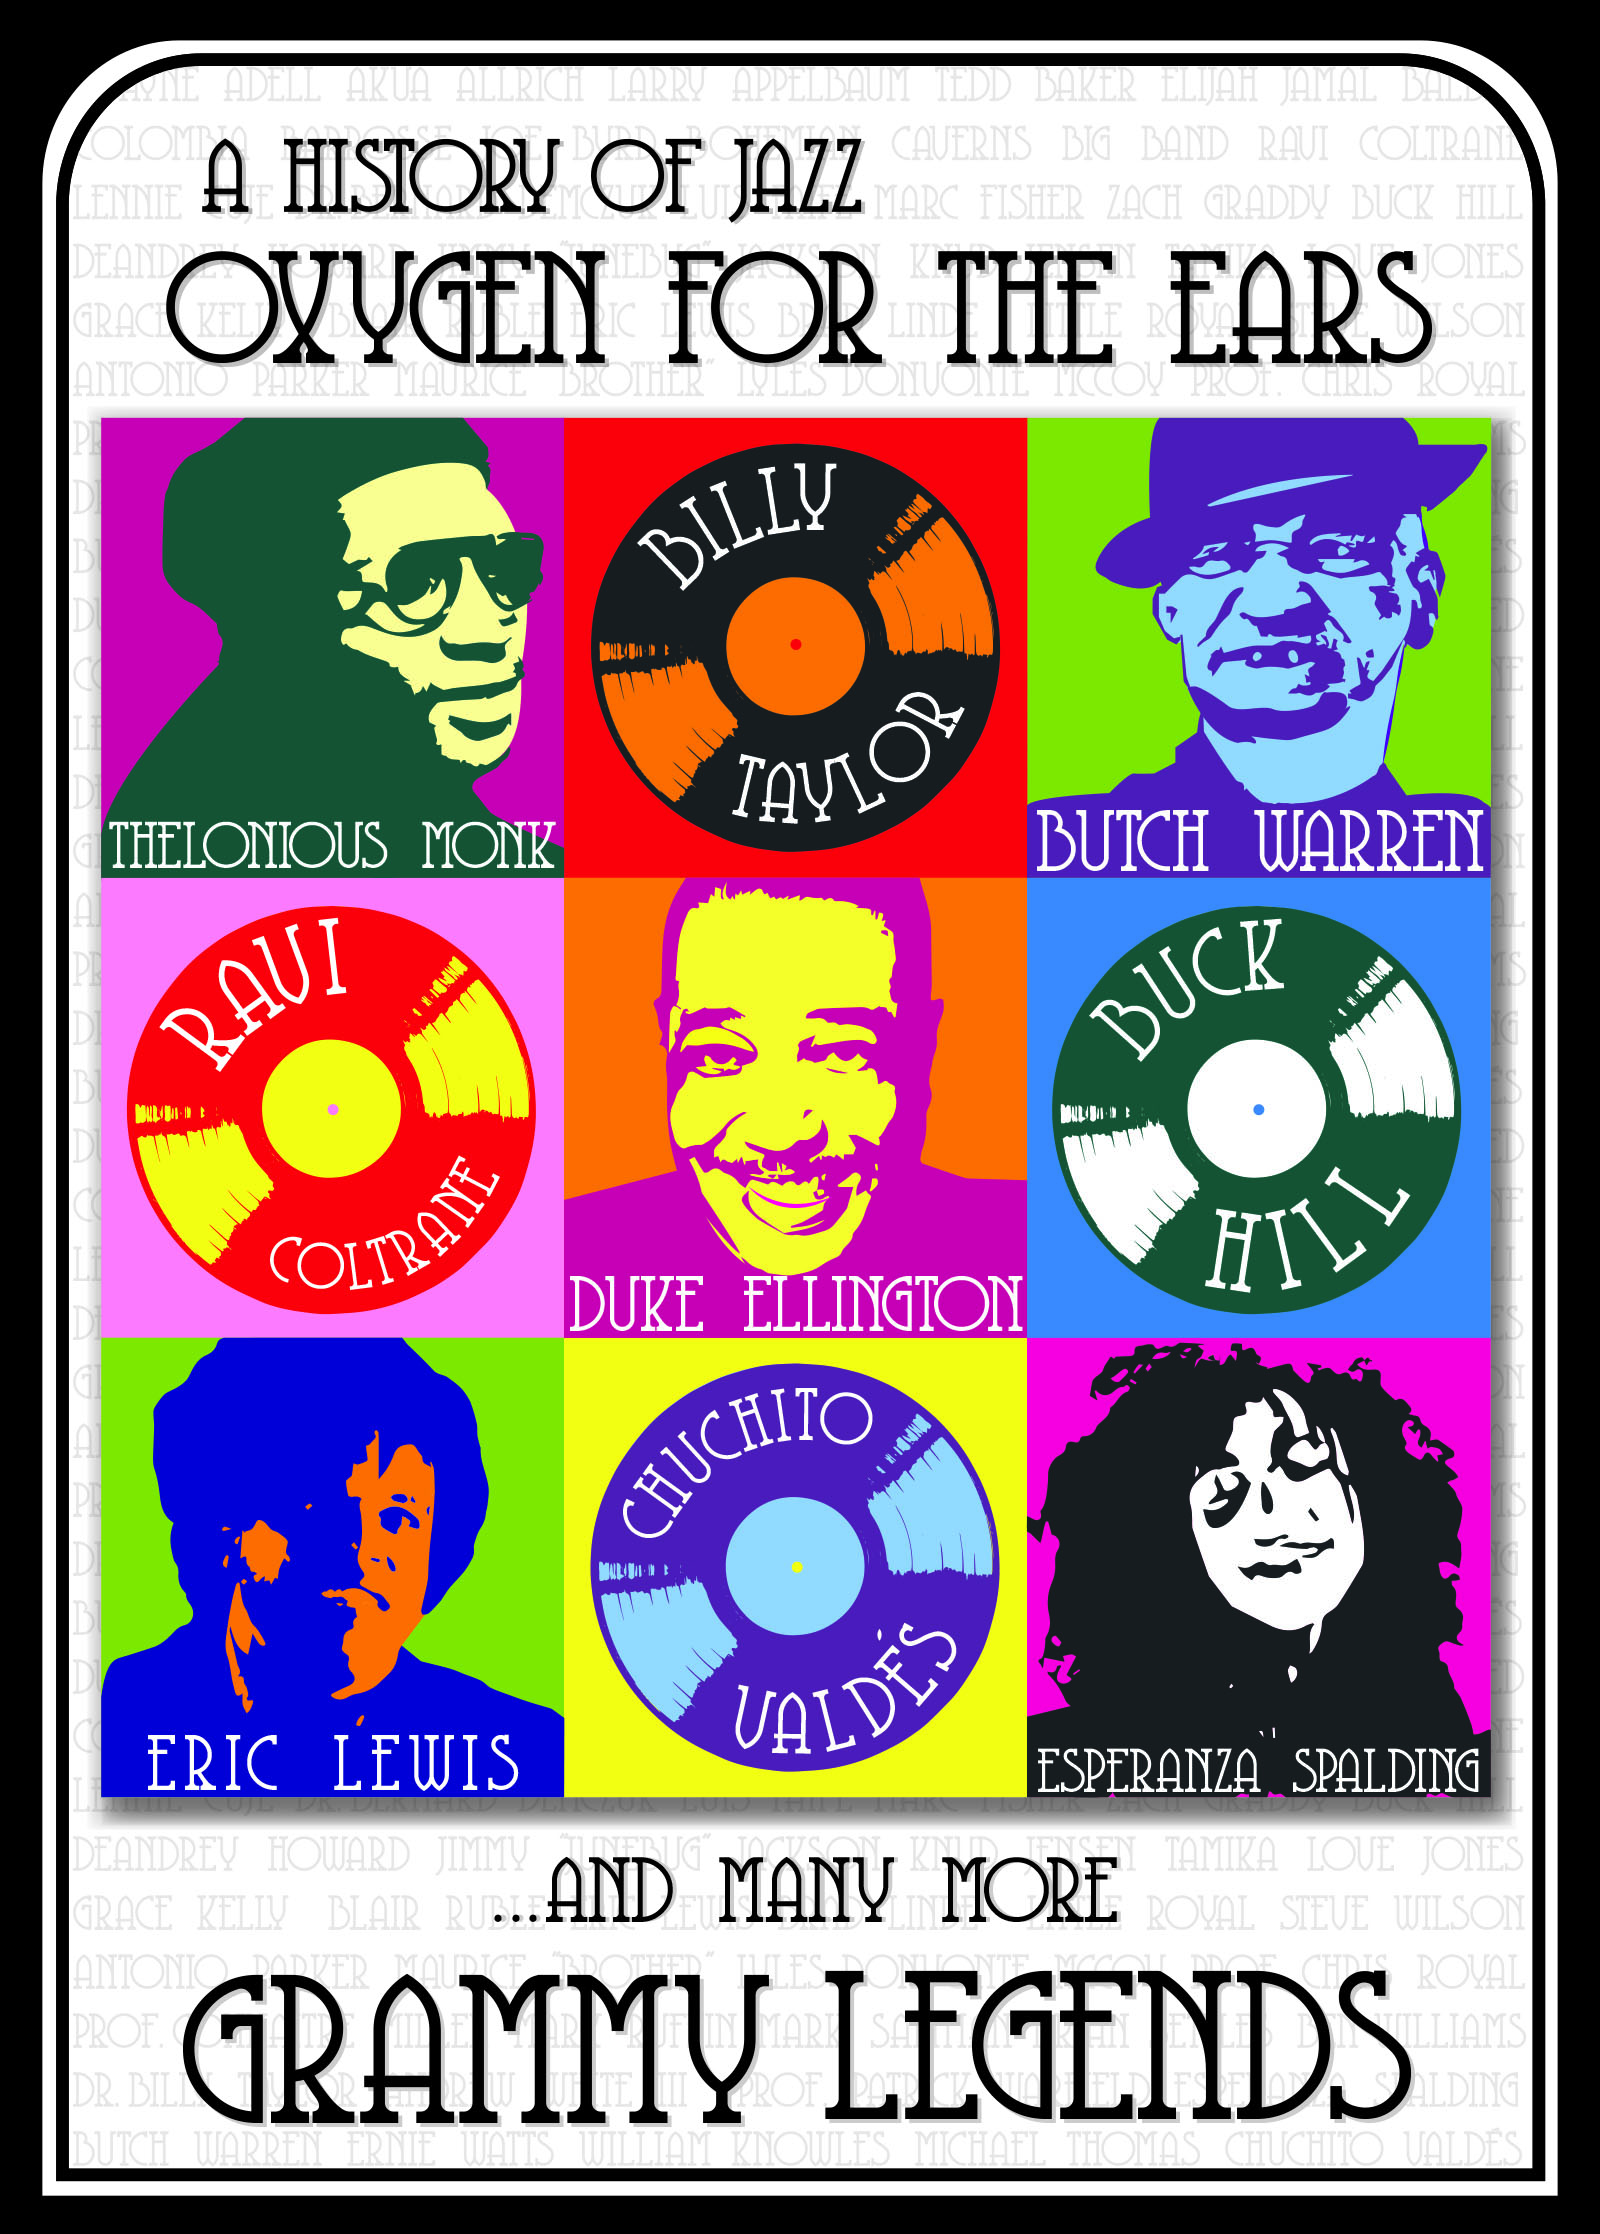 Eric Lewis, Thelonious Monk, Butch Warren, Billy Taylor, Esperanza Spalding, Ravi Coltrane, Buck Hill and Chuchito Valdés in Oxygen for the Ears: Living Jazz (2012)